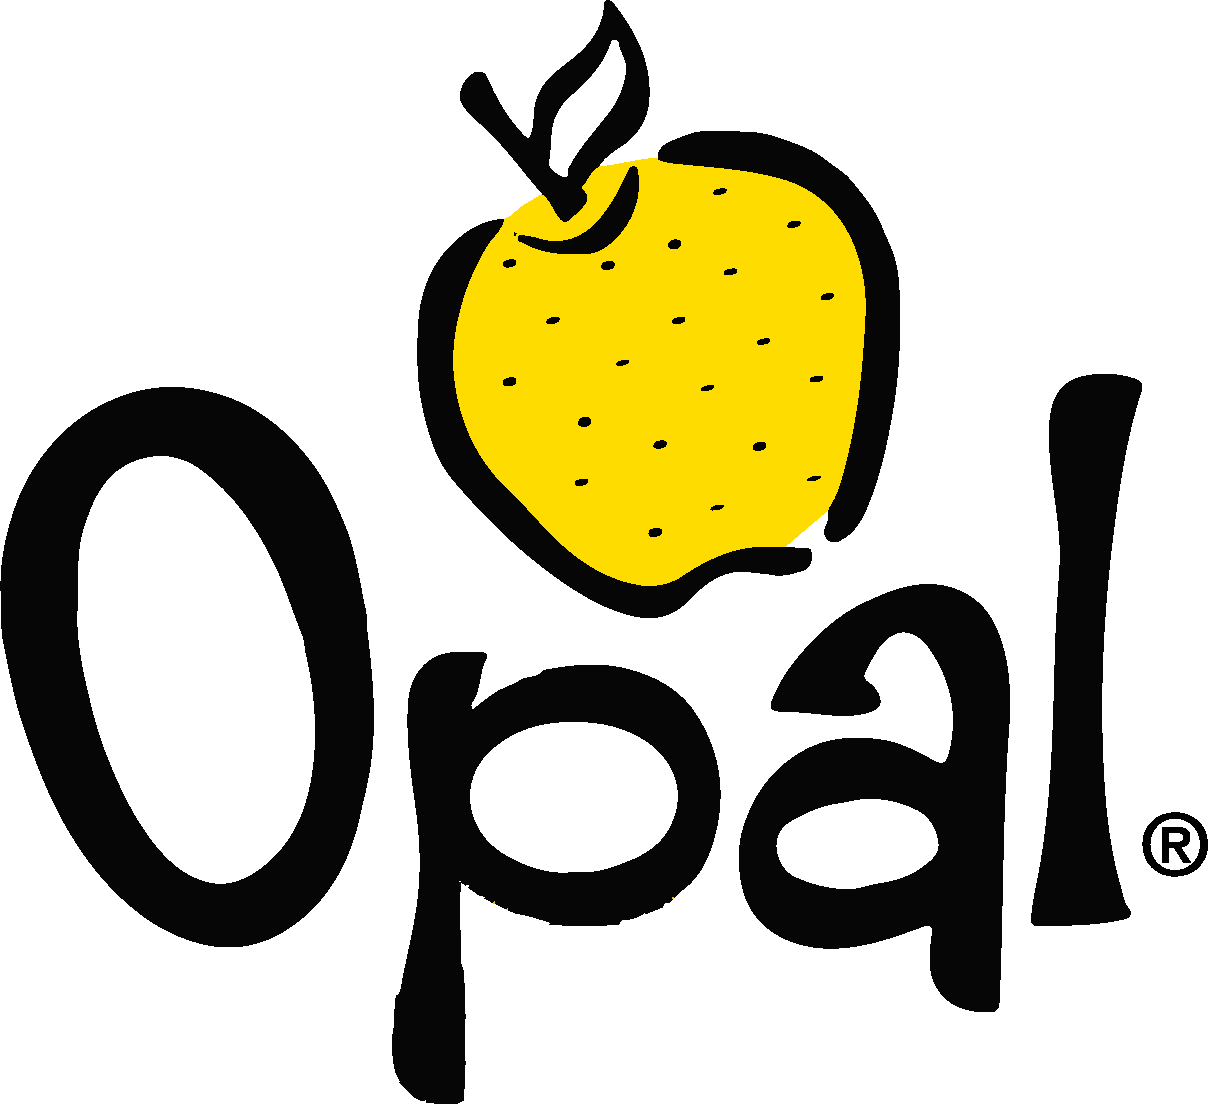 Opal Apple - It's official; Opal Apples are back in stores! These